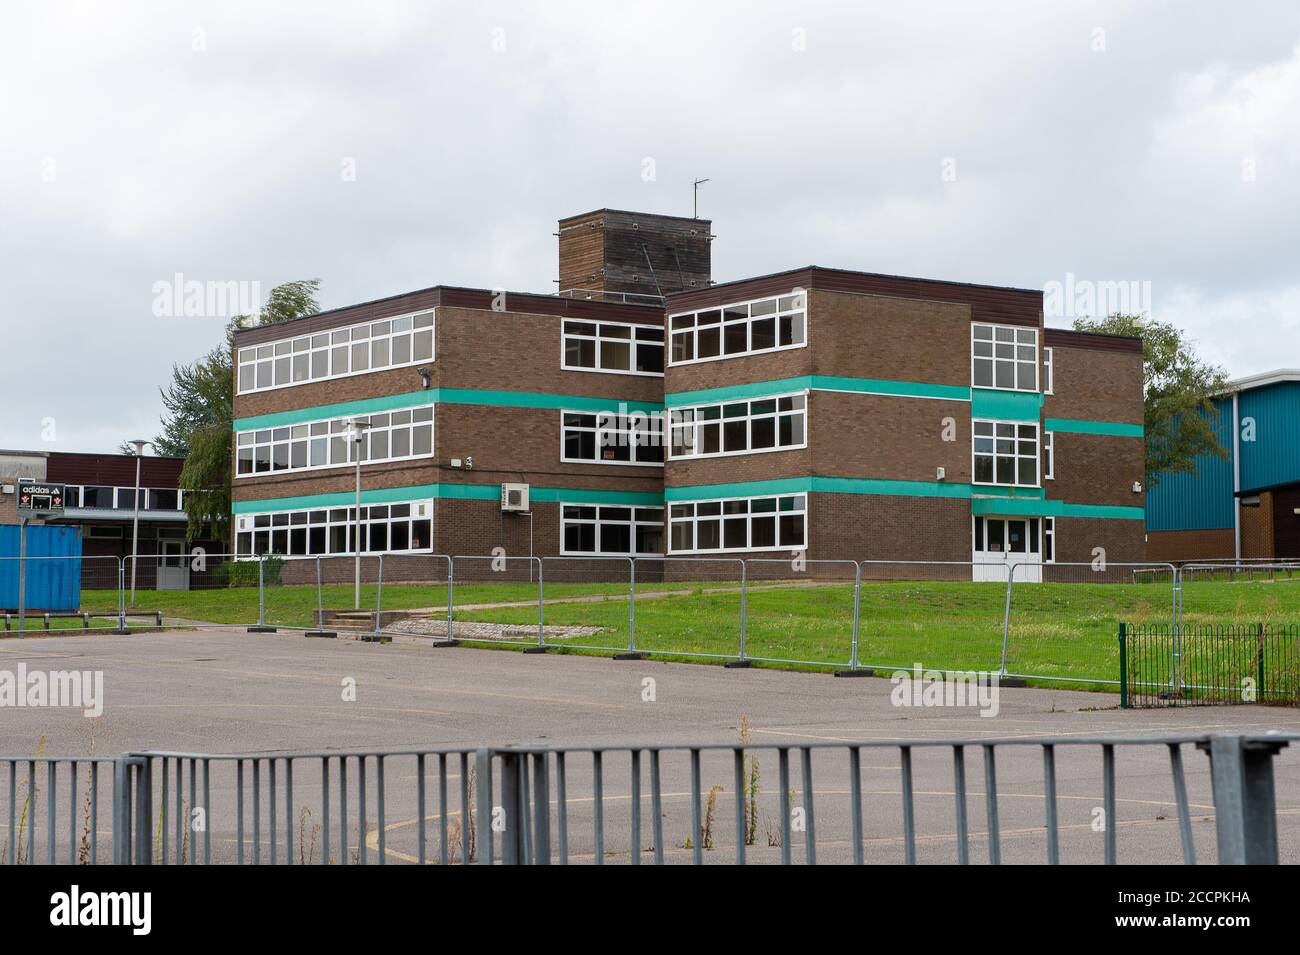 Burnham, Slough, Berkshire, UK. 21st August, 2020. As children are due to return to school in September, the E-ACT Burnham Park Academy (formerly known as Burnham Secondary) has been closed permanently. It was put into special measures followng an Ofsted inspection. Credit: Maureen McLean/Alamy Stock Photo